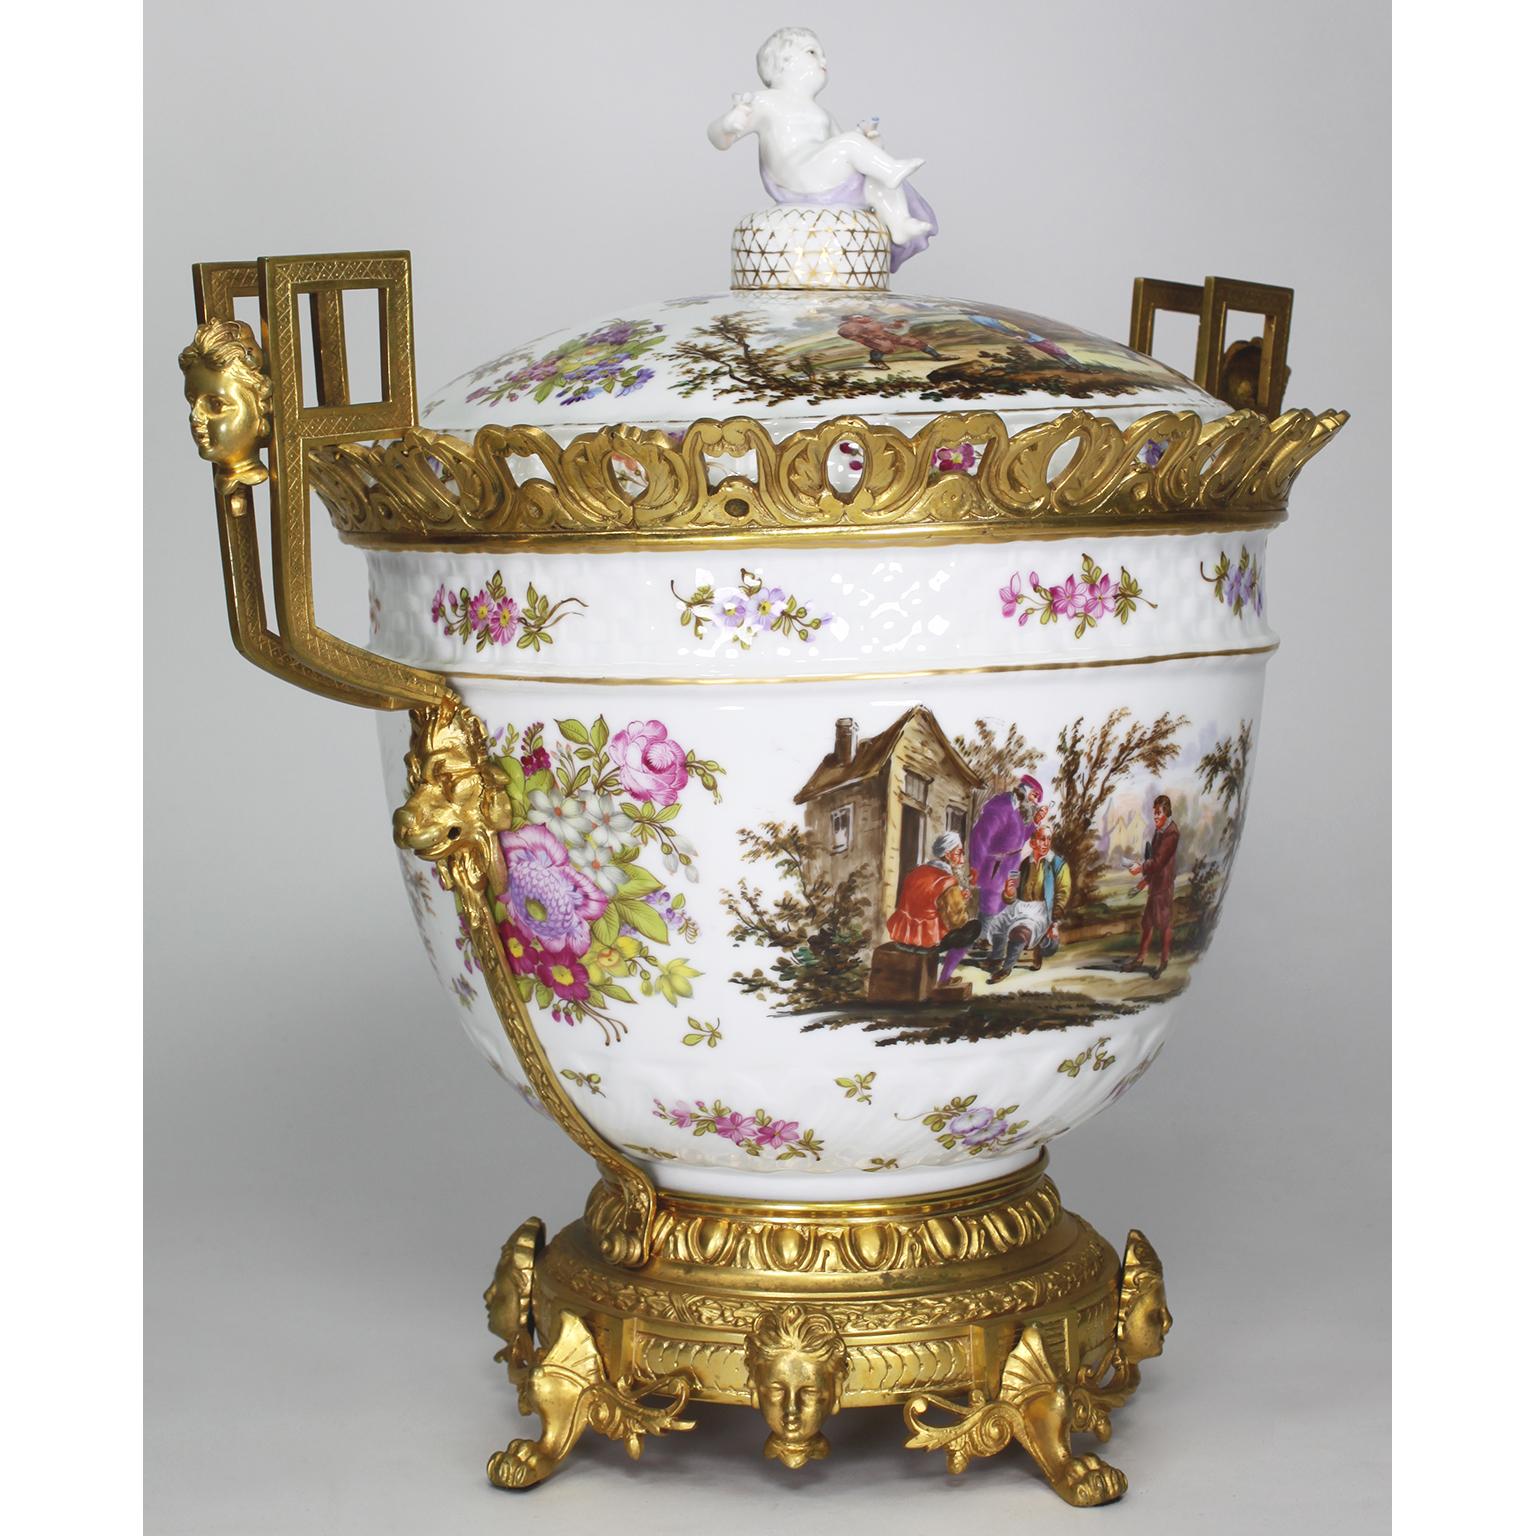 Large German Porcelain & Gilt-Bronze Mounted Urn with Cover in Manner of Meissen For Sale 4